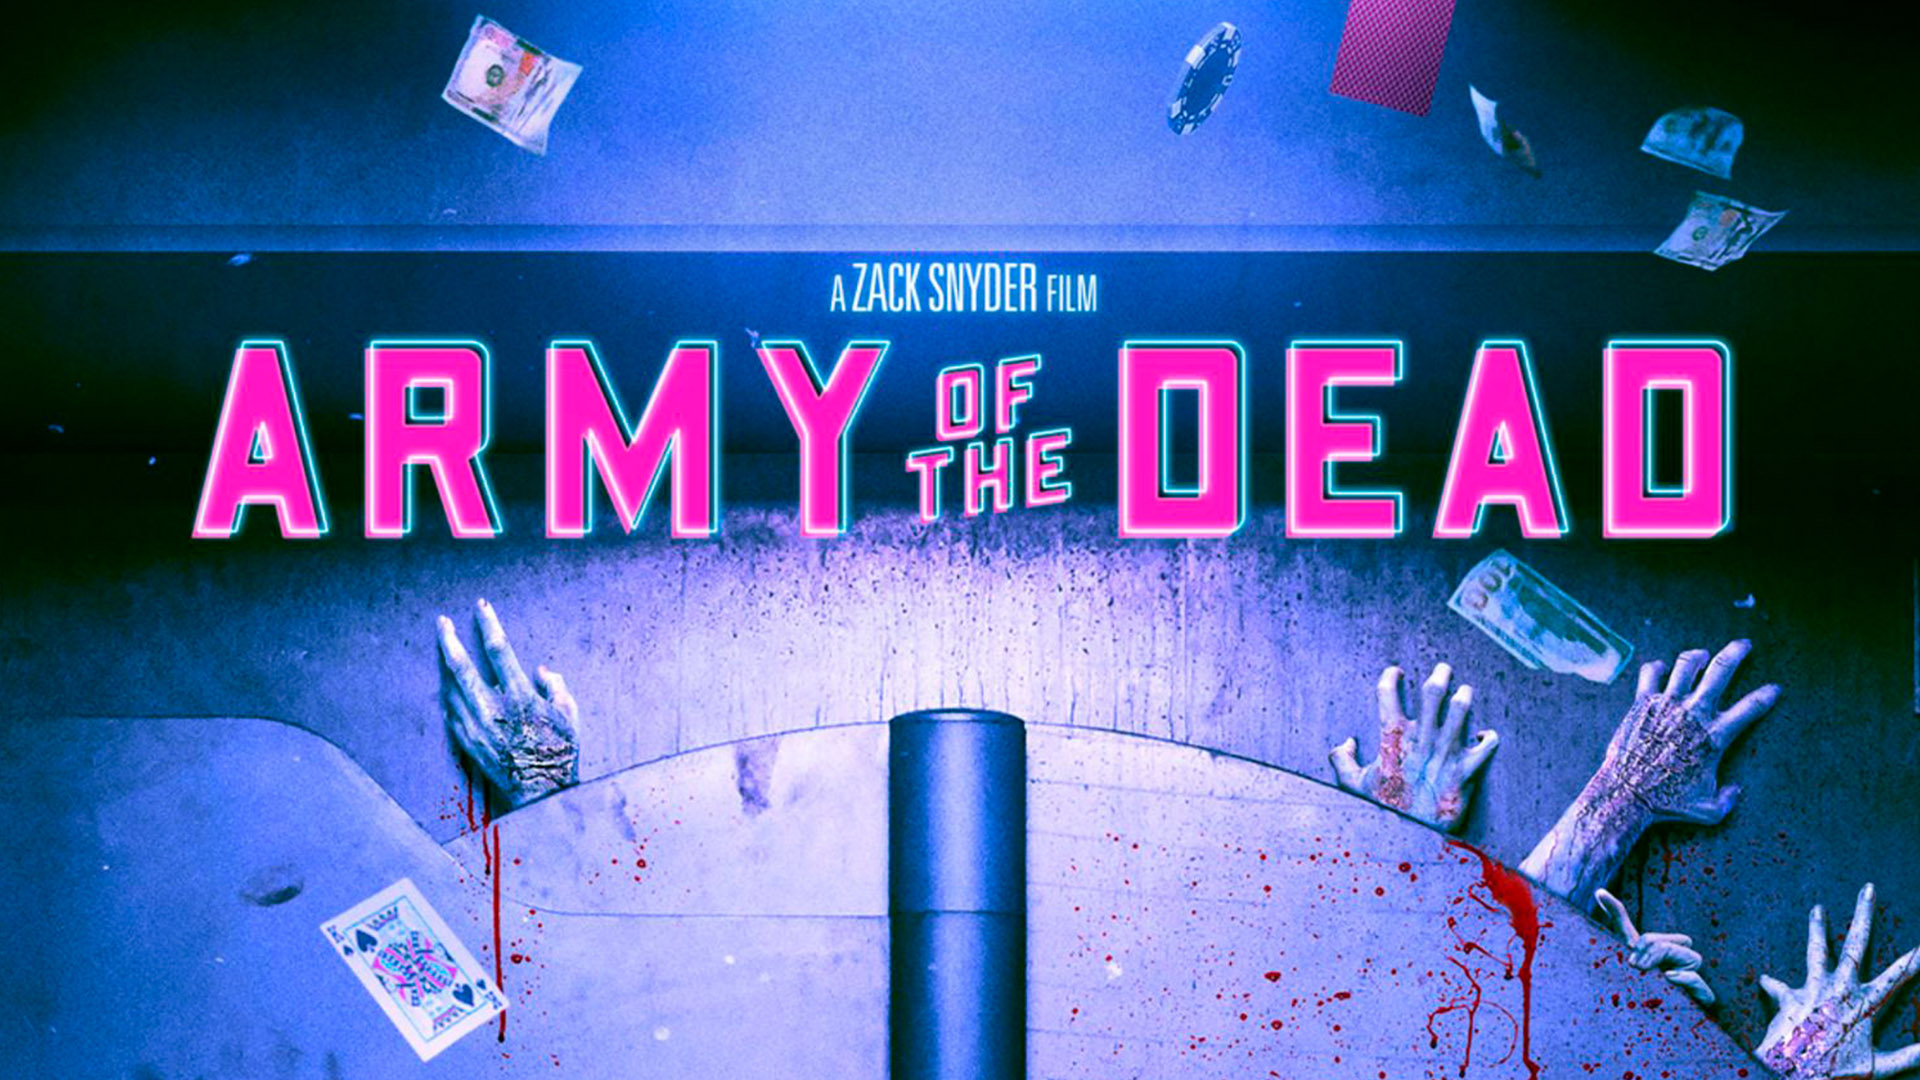 Watch the first trailer Zack Snyder's Army of the Dead Rotten Usagi